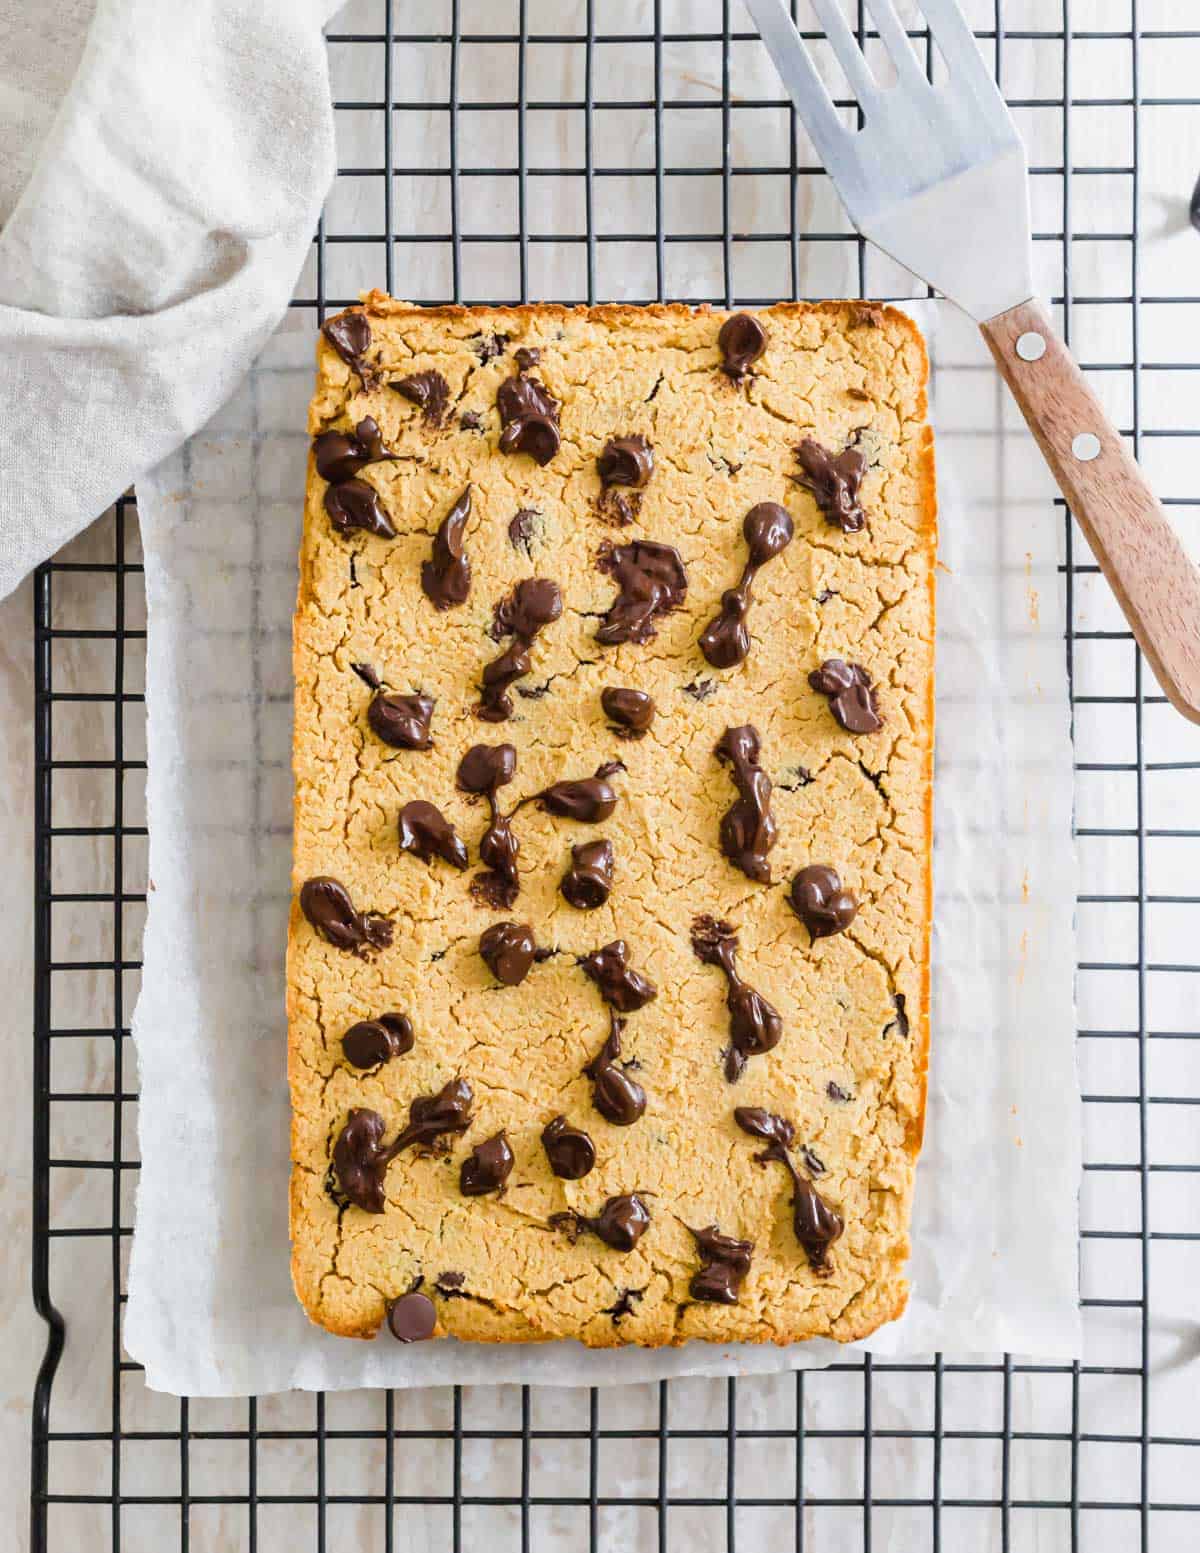 Baked chocolate chip chickpea blondies on a cooling rack.